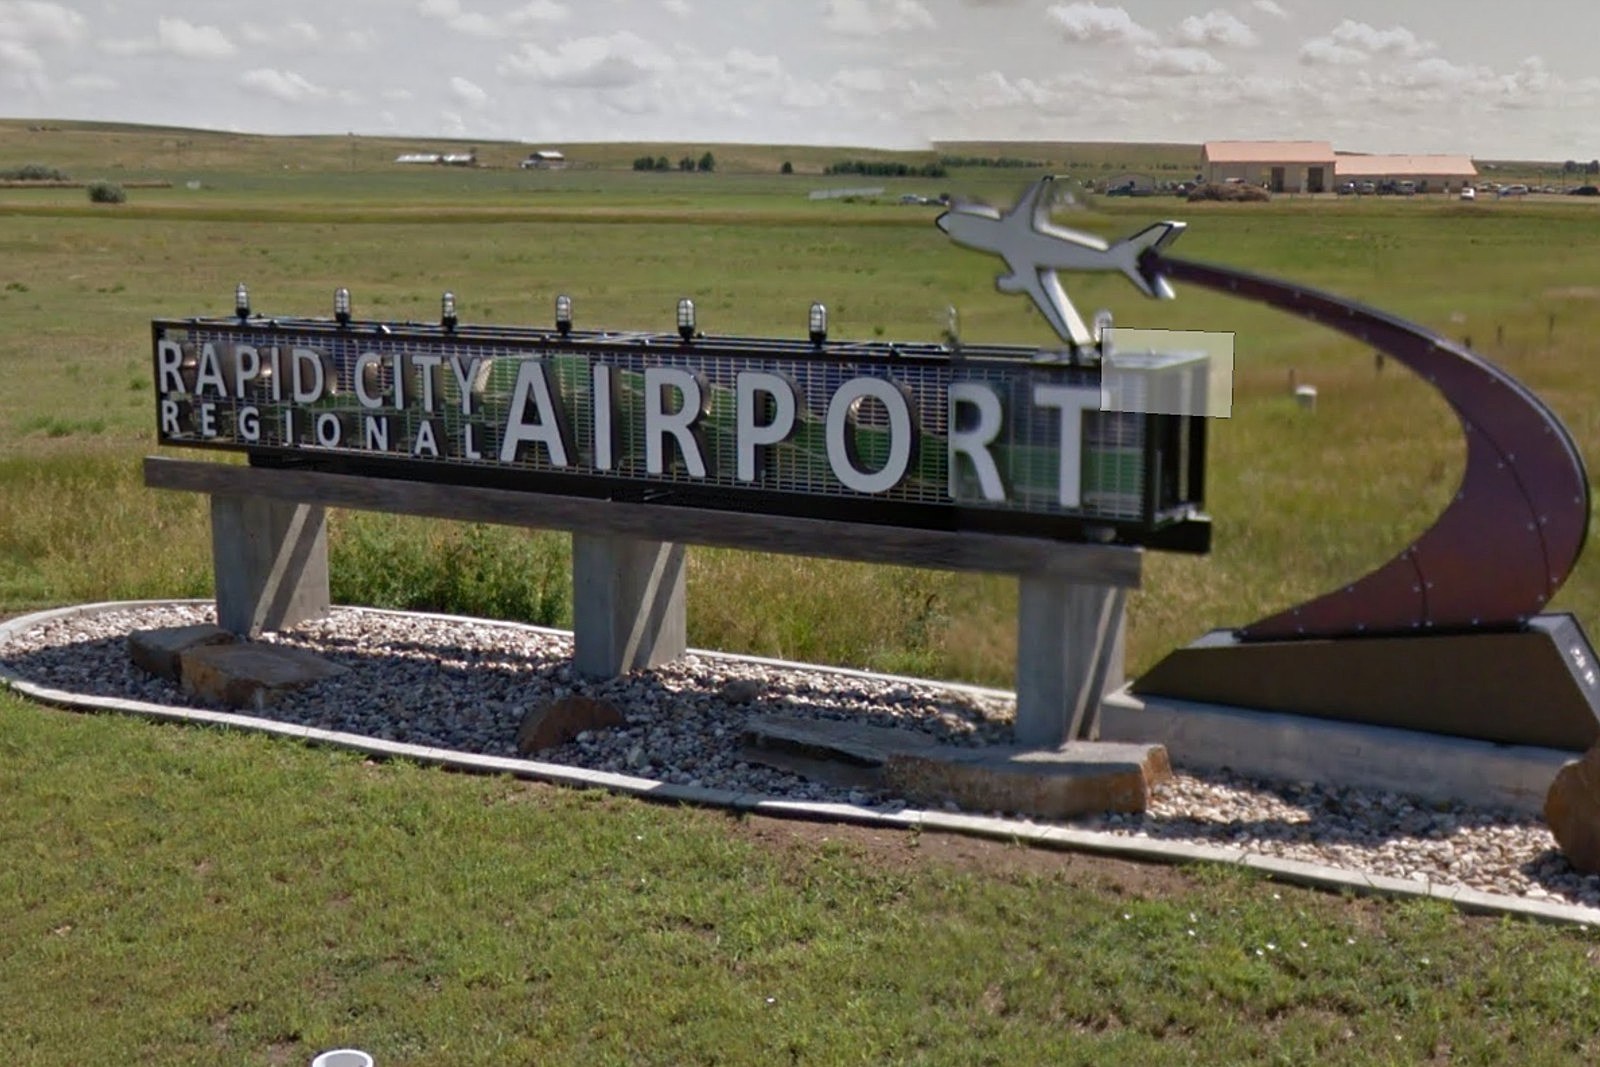 what are the largest airports near rapid city sd